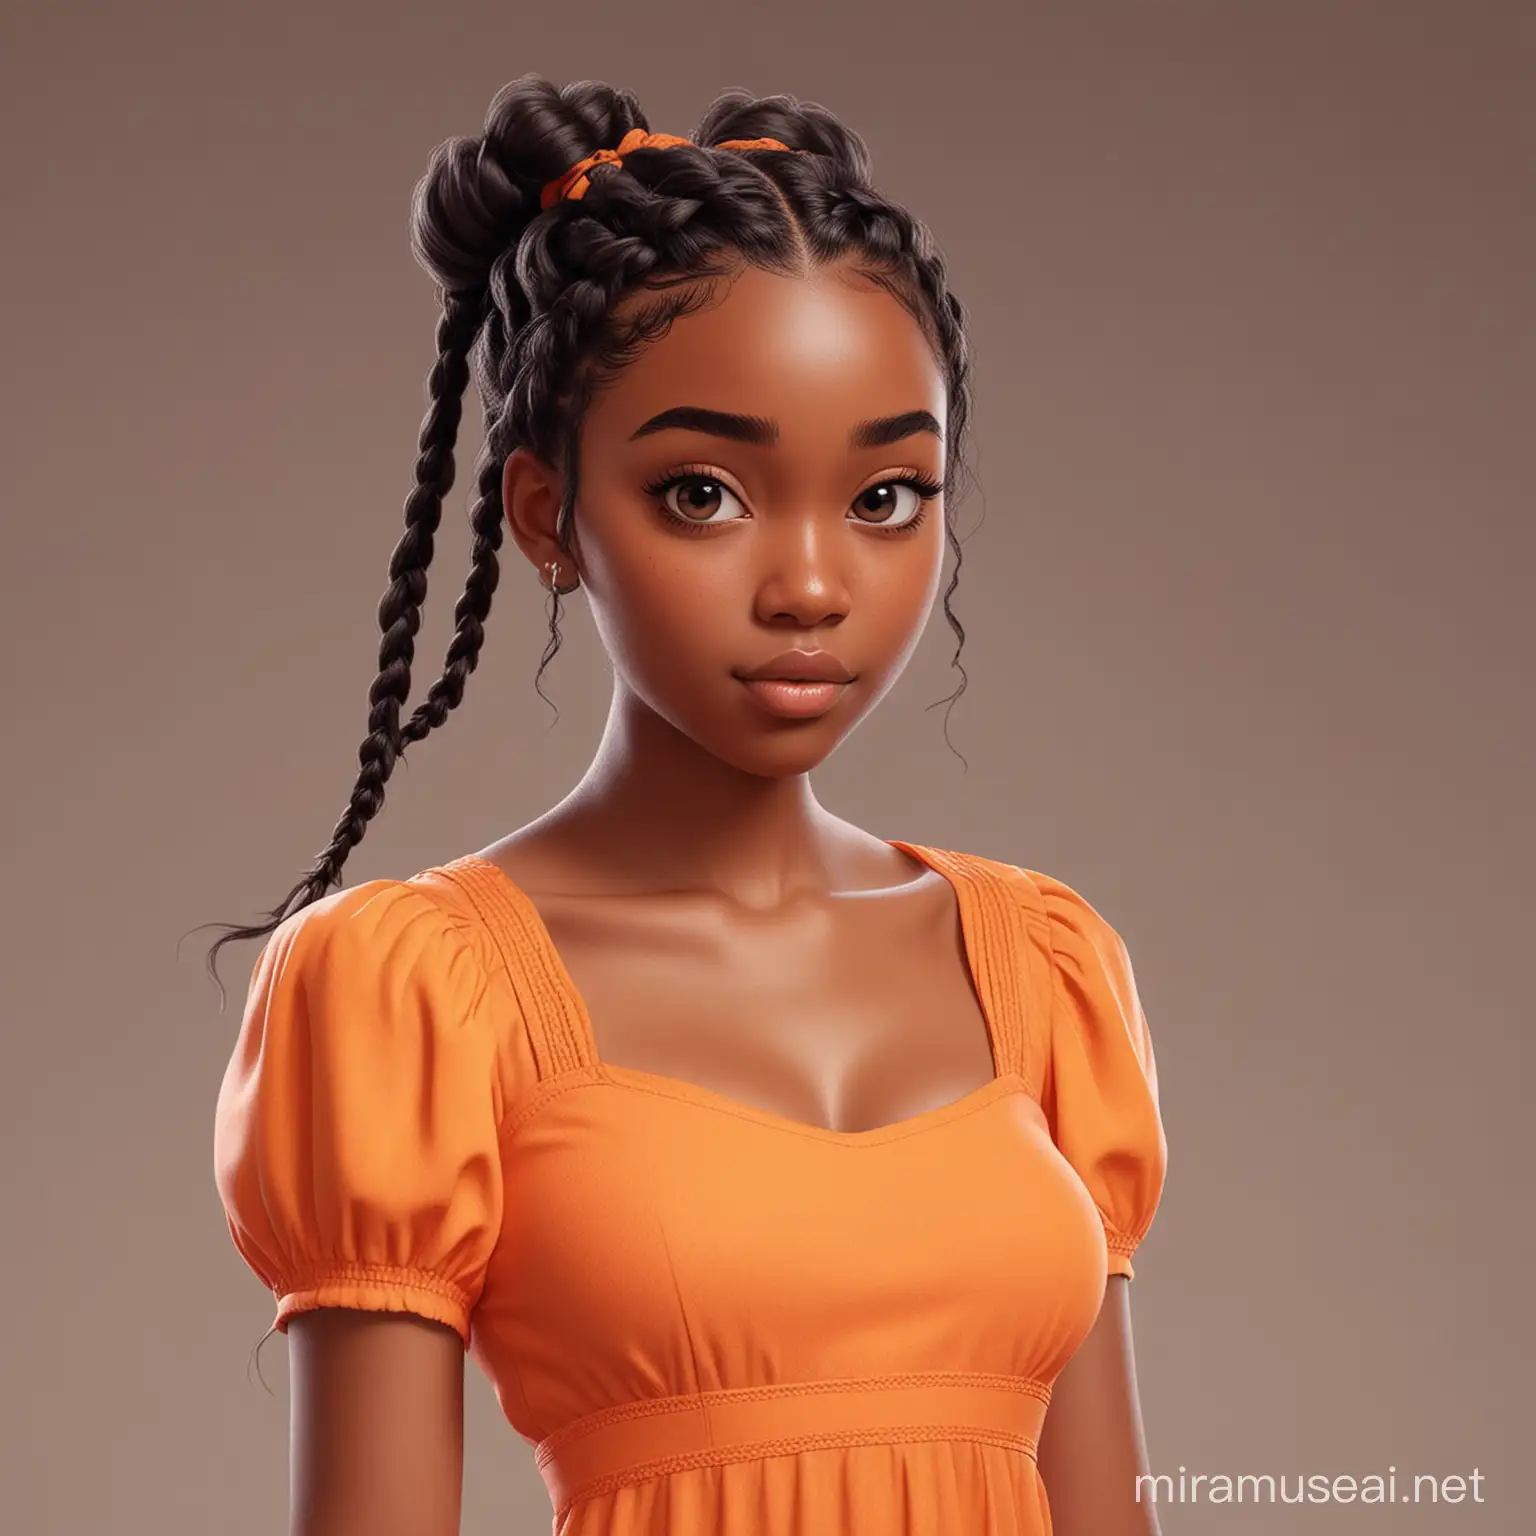 2d animation, cute Black girl, short styled braids, , full length, dressed in orange dress, face close up